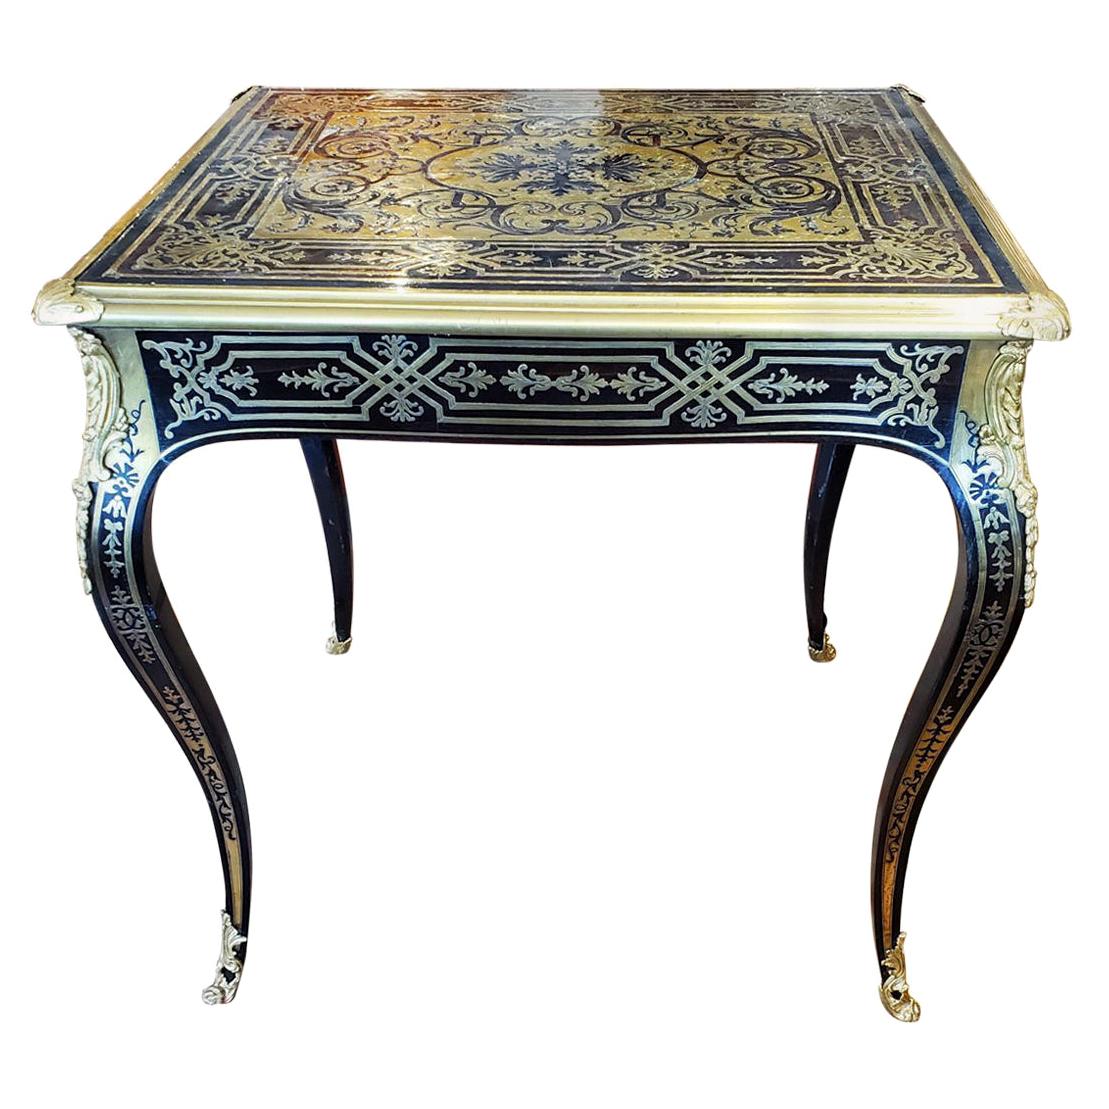 Early 18th Century Regency Period Boulle Tortoise Shell Brass Inlaid Side Table